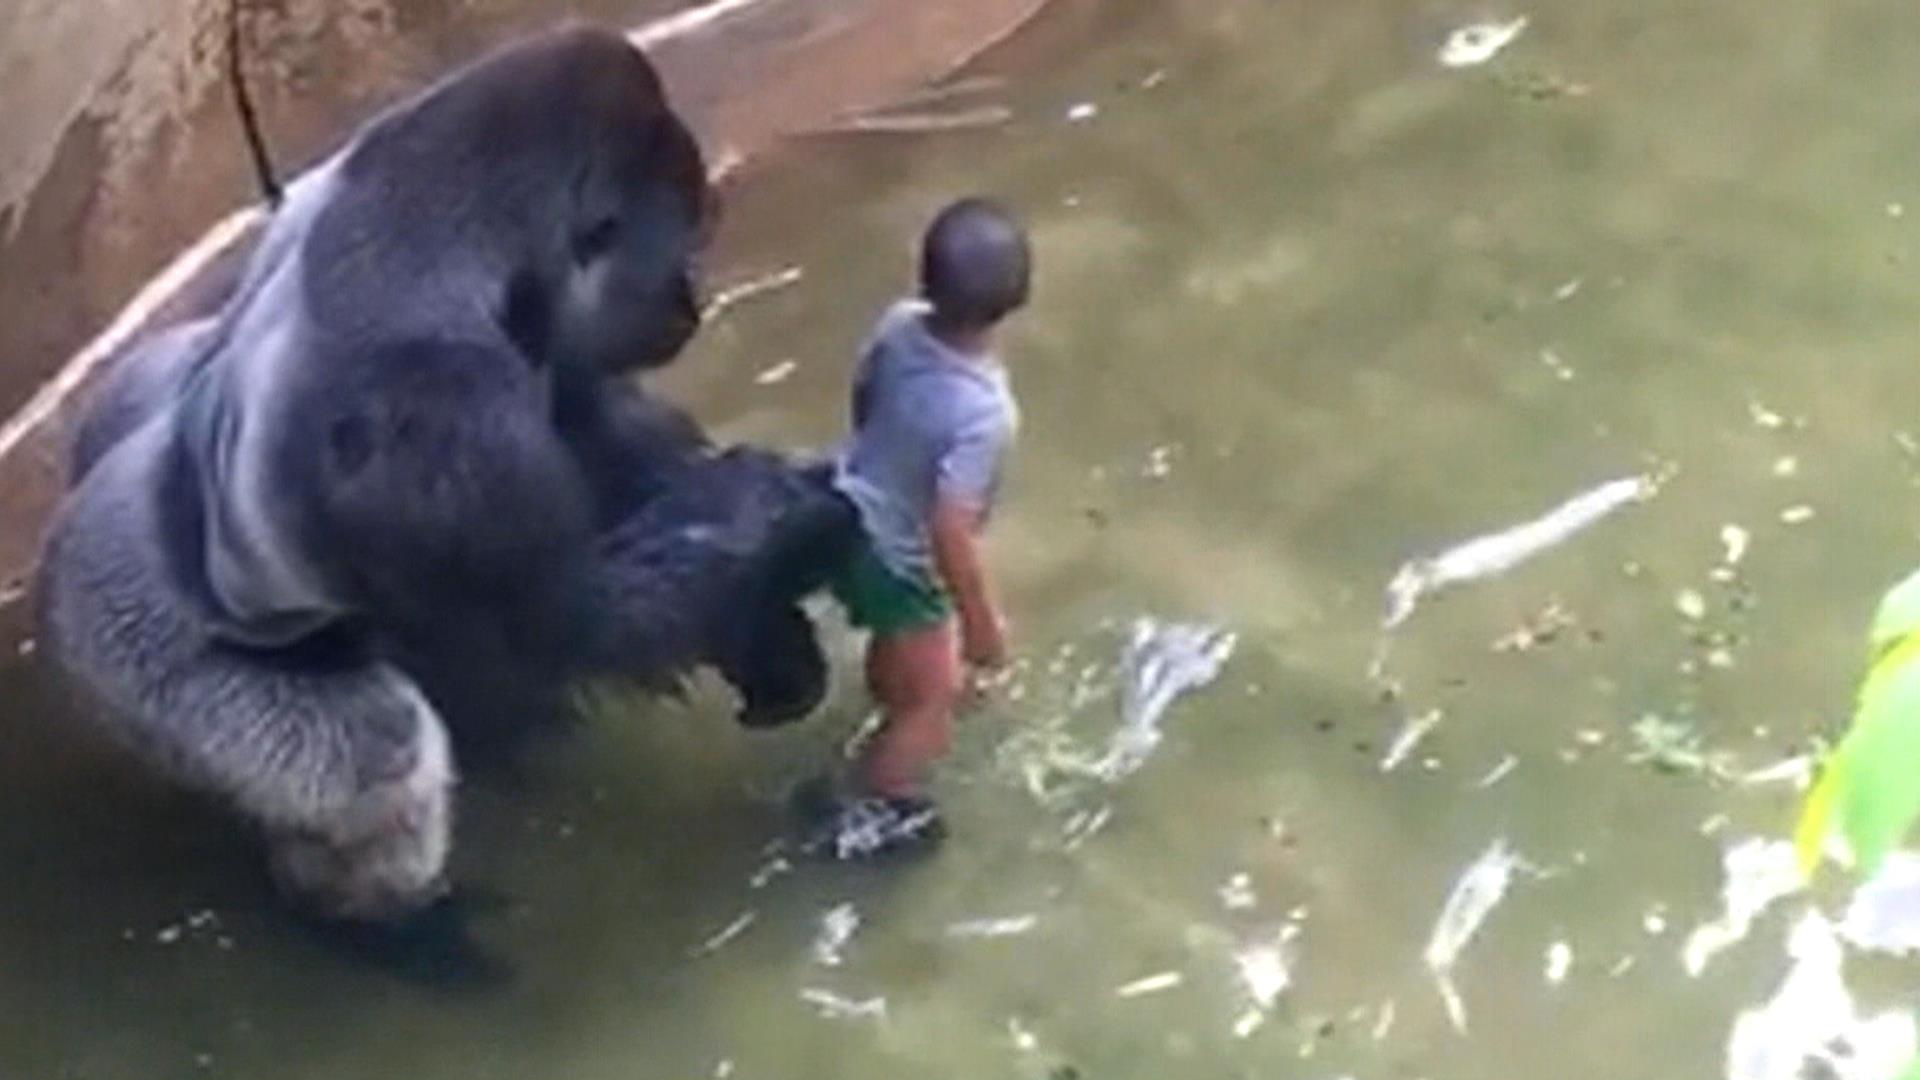 Giant gorilla is killed after boy slips into zoo enclosure - TODAY.com